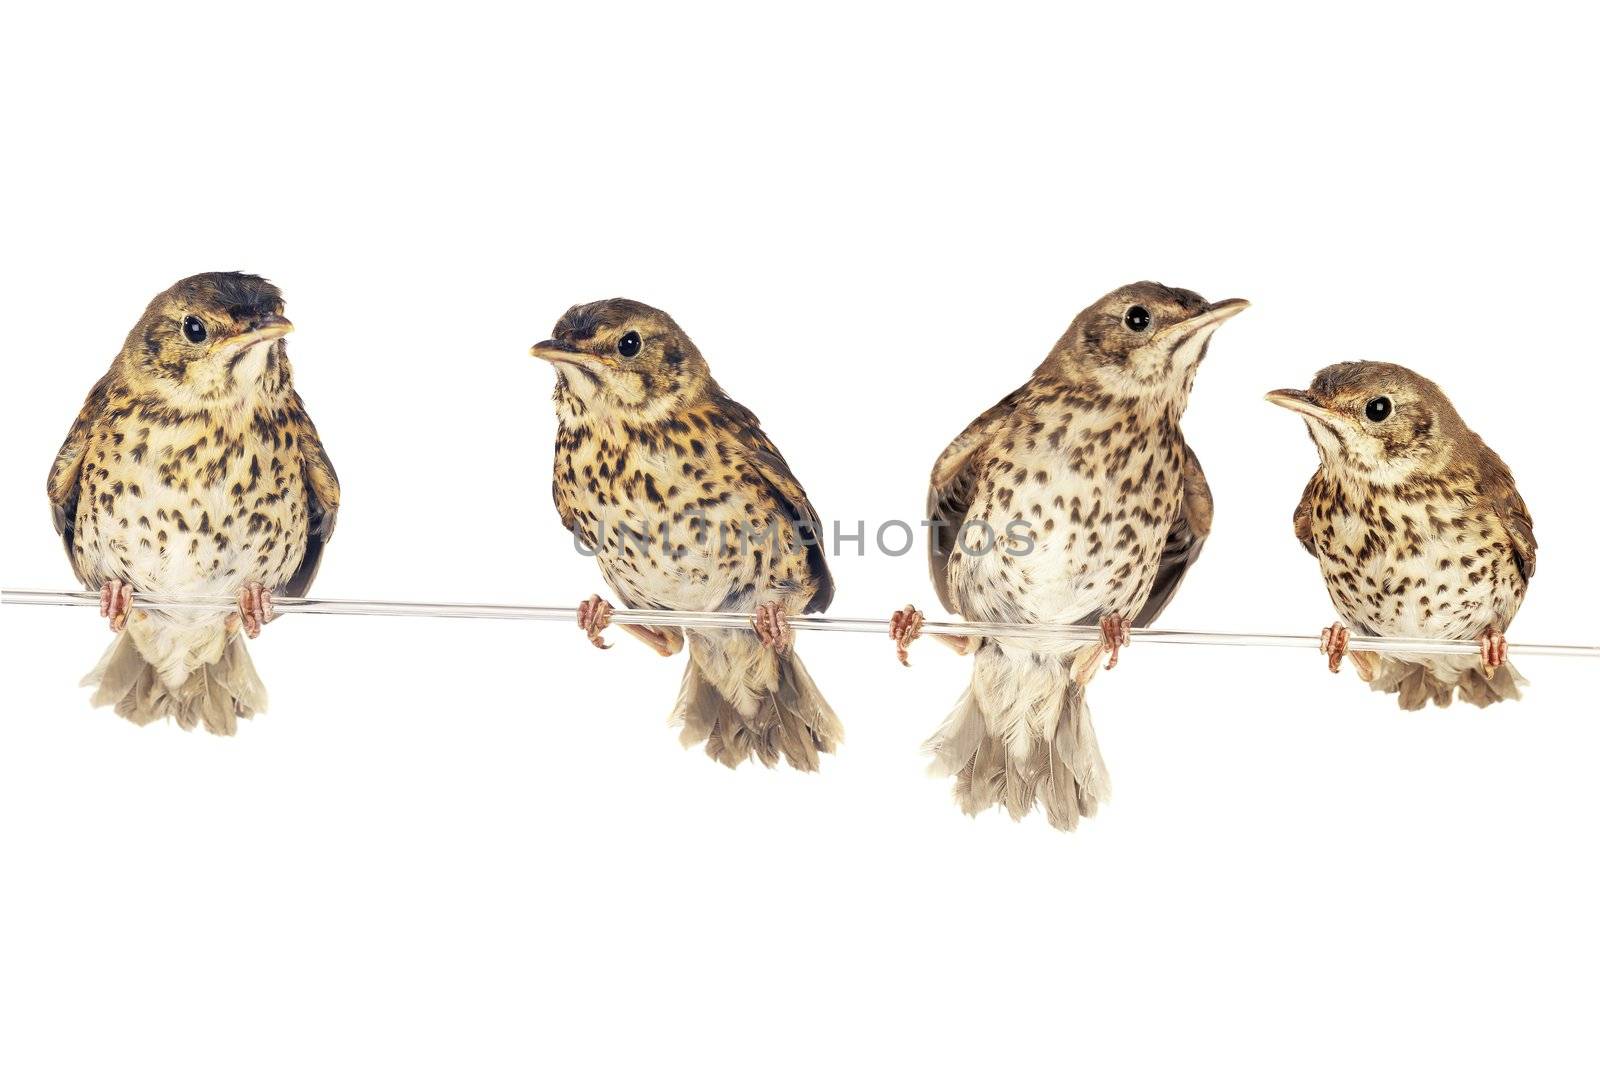 two song thrush  on a white background